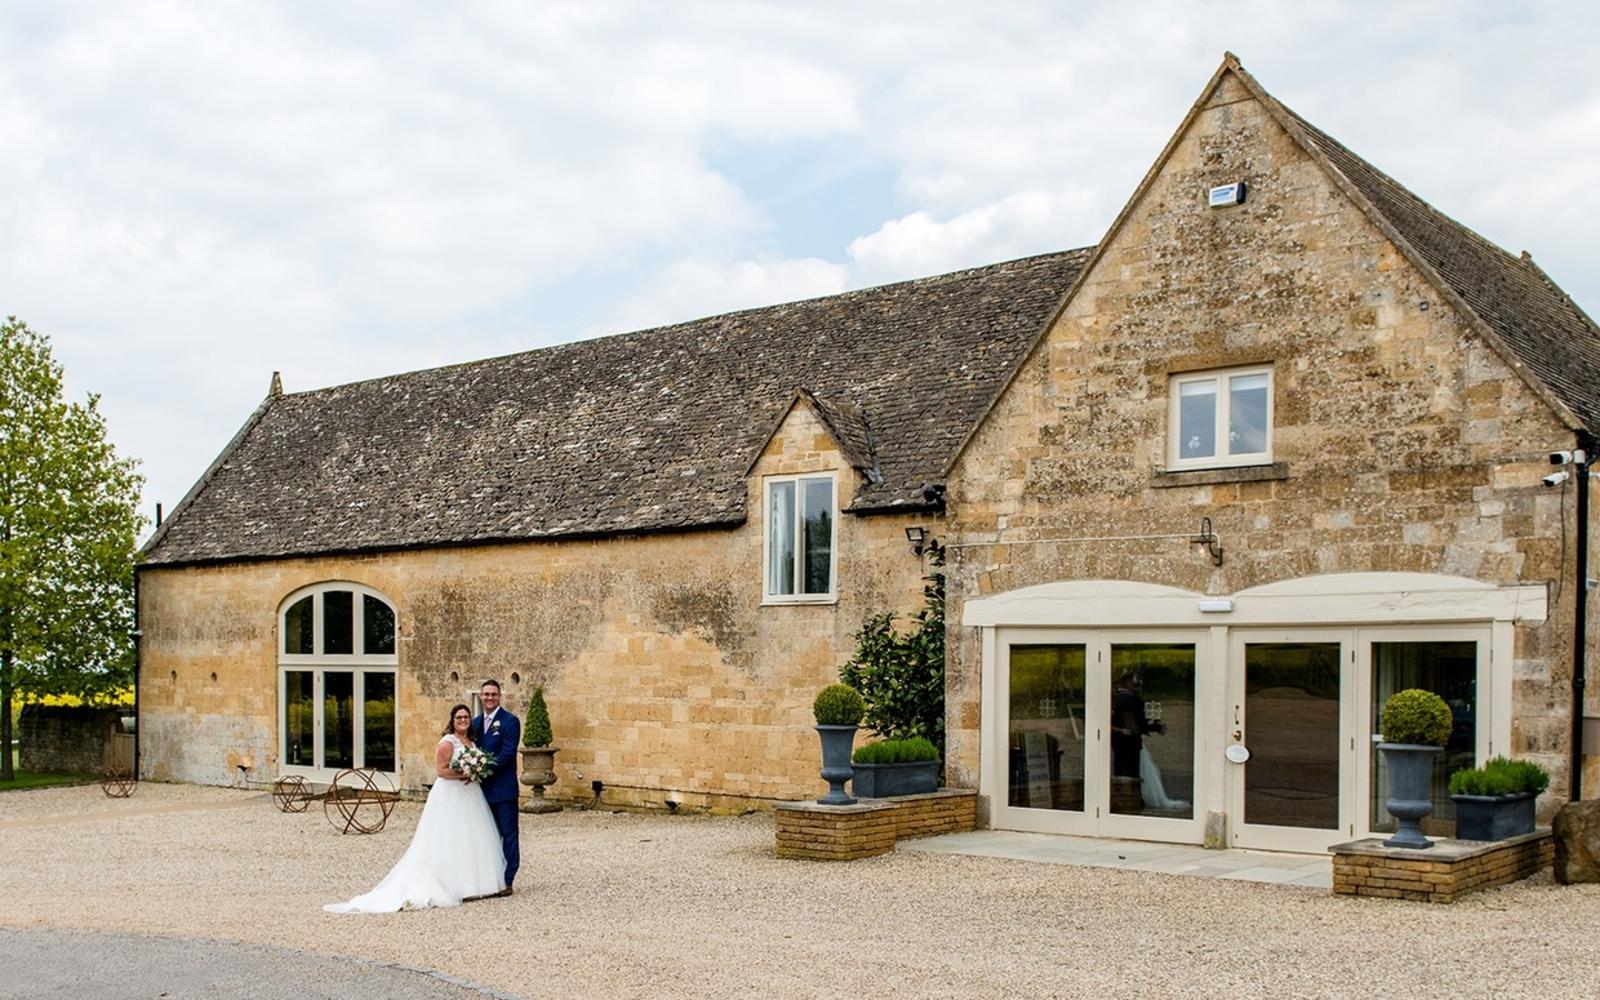 Capture Every Moment wedding photography duo from Cirencester reportage and traditional photographers Lapstone Barn Chipping Campden Cotswolds venue Cotswold stone Barn 